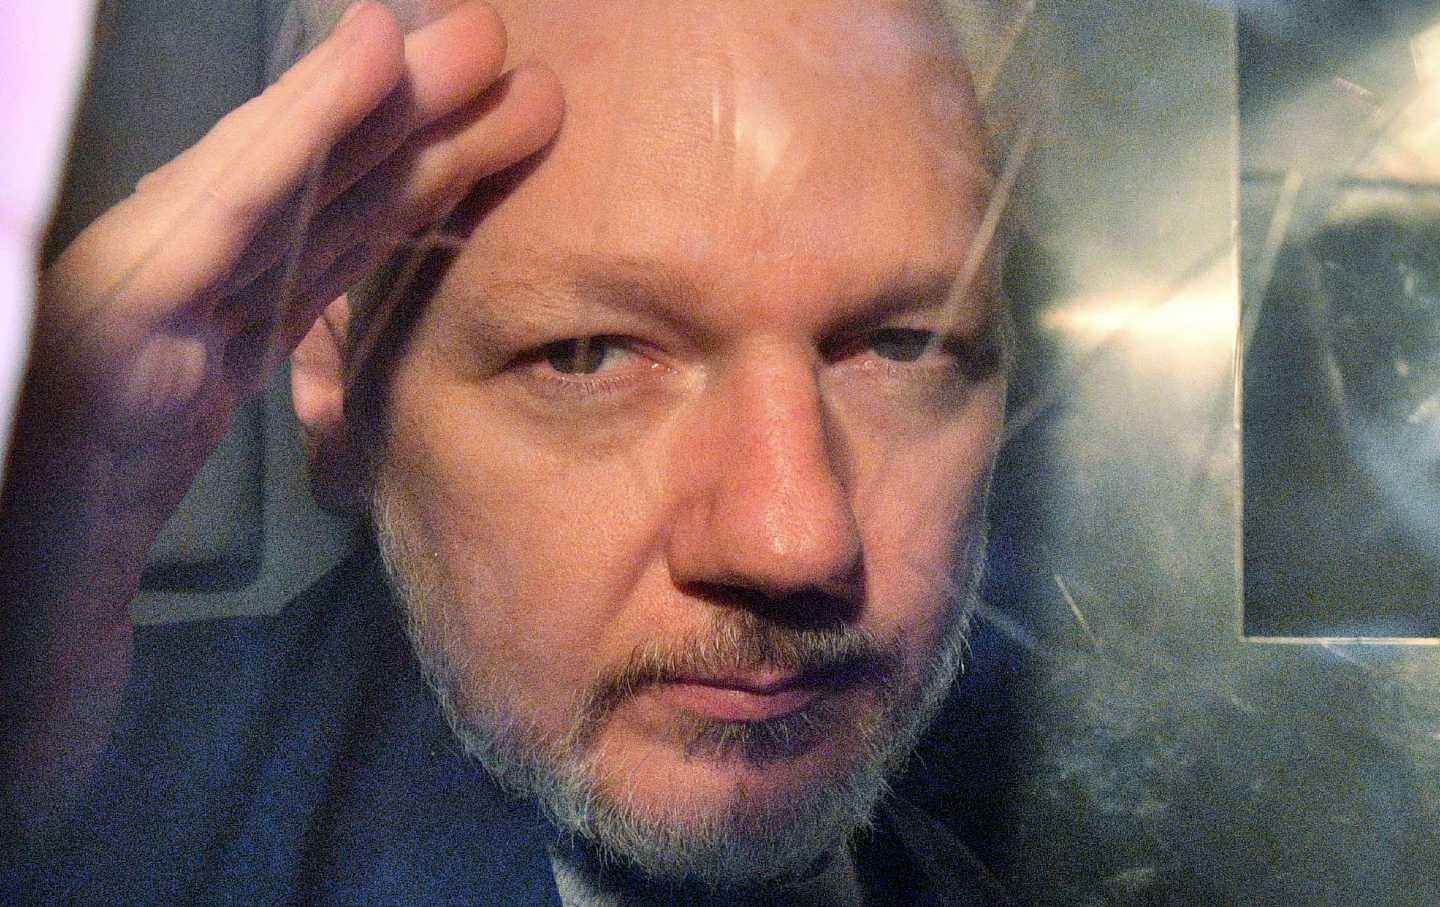 Julian Assange waves slightly with his face up close against the window of a prison van